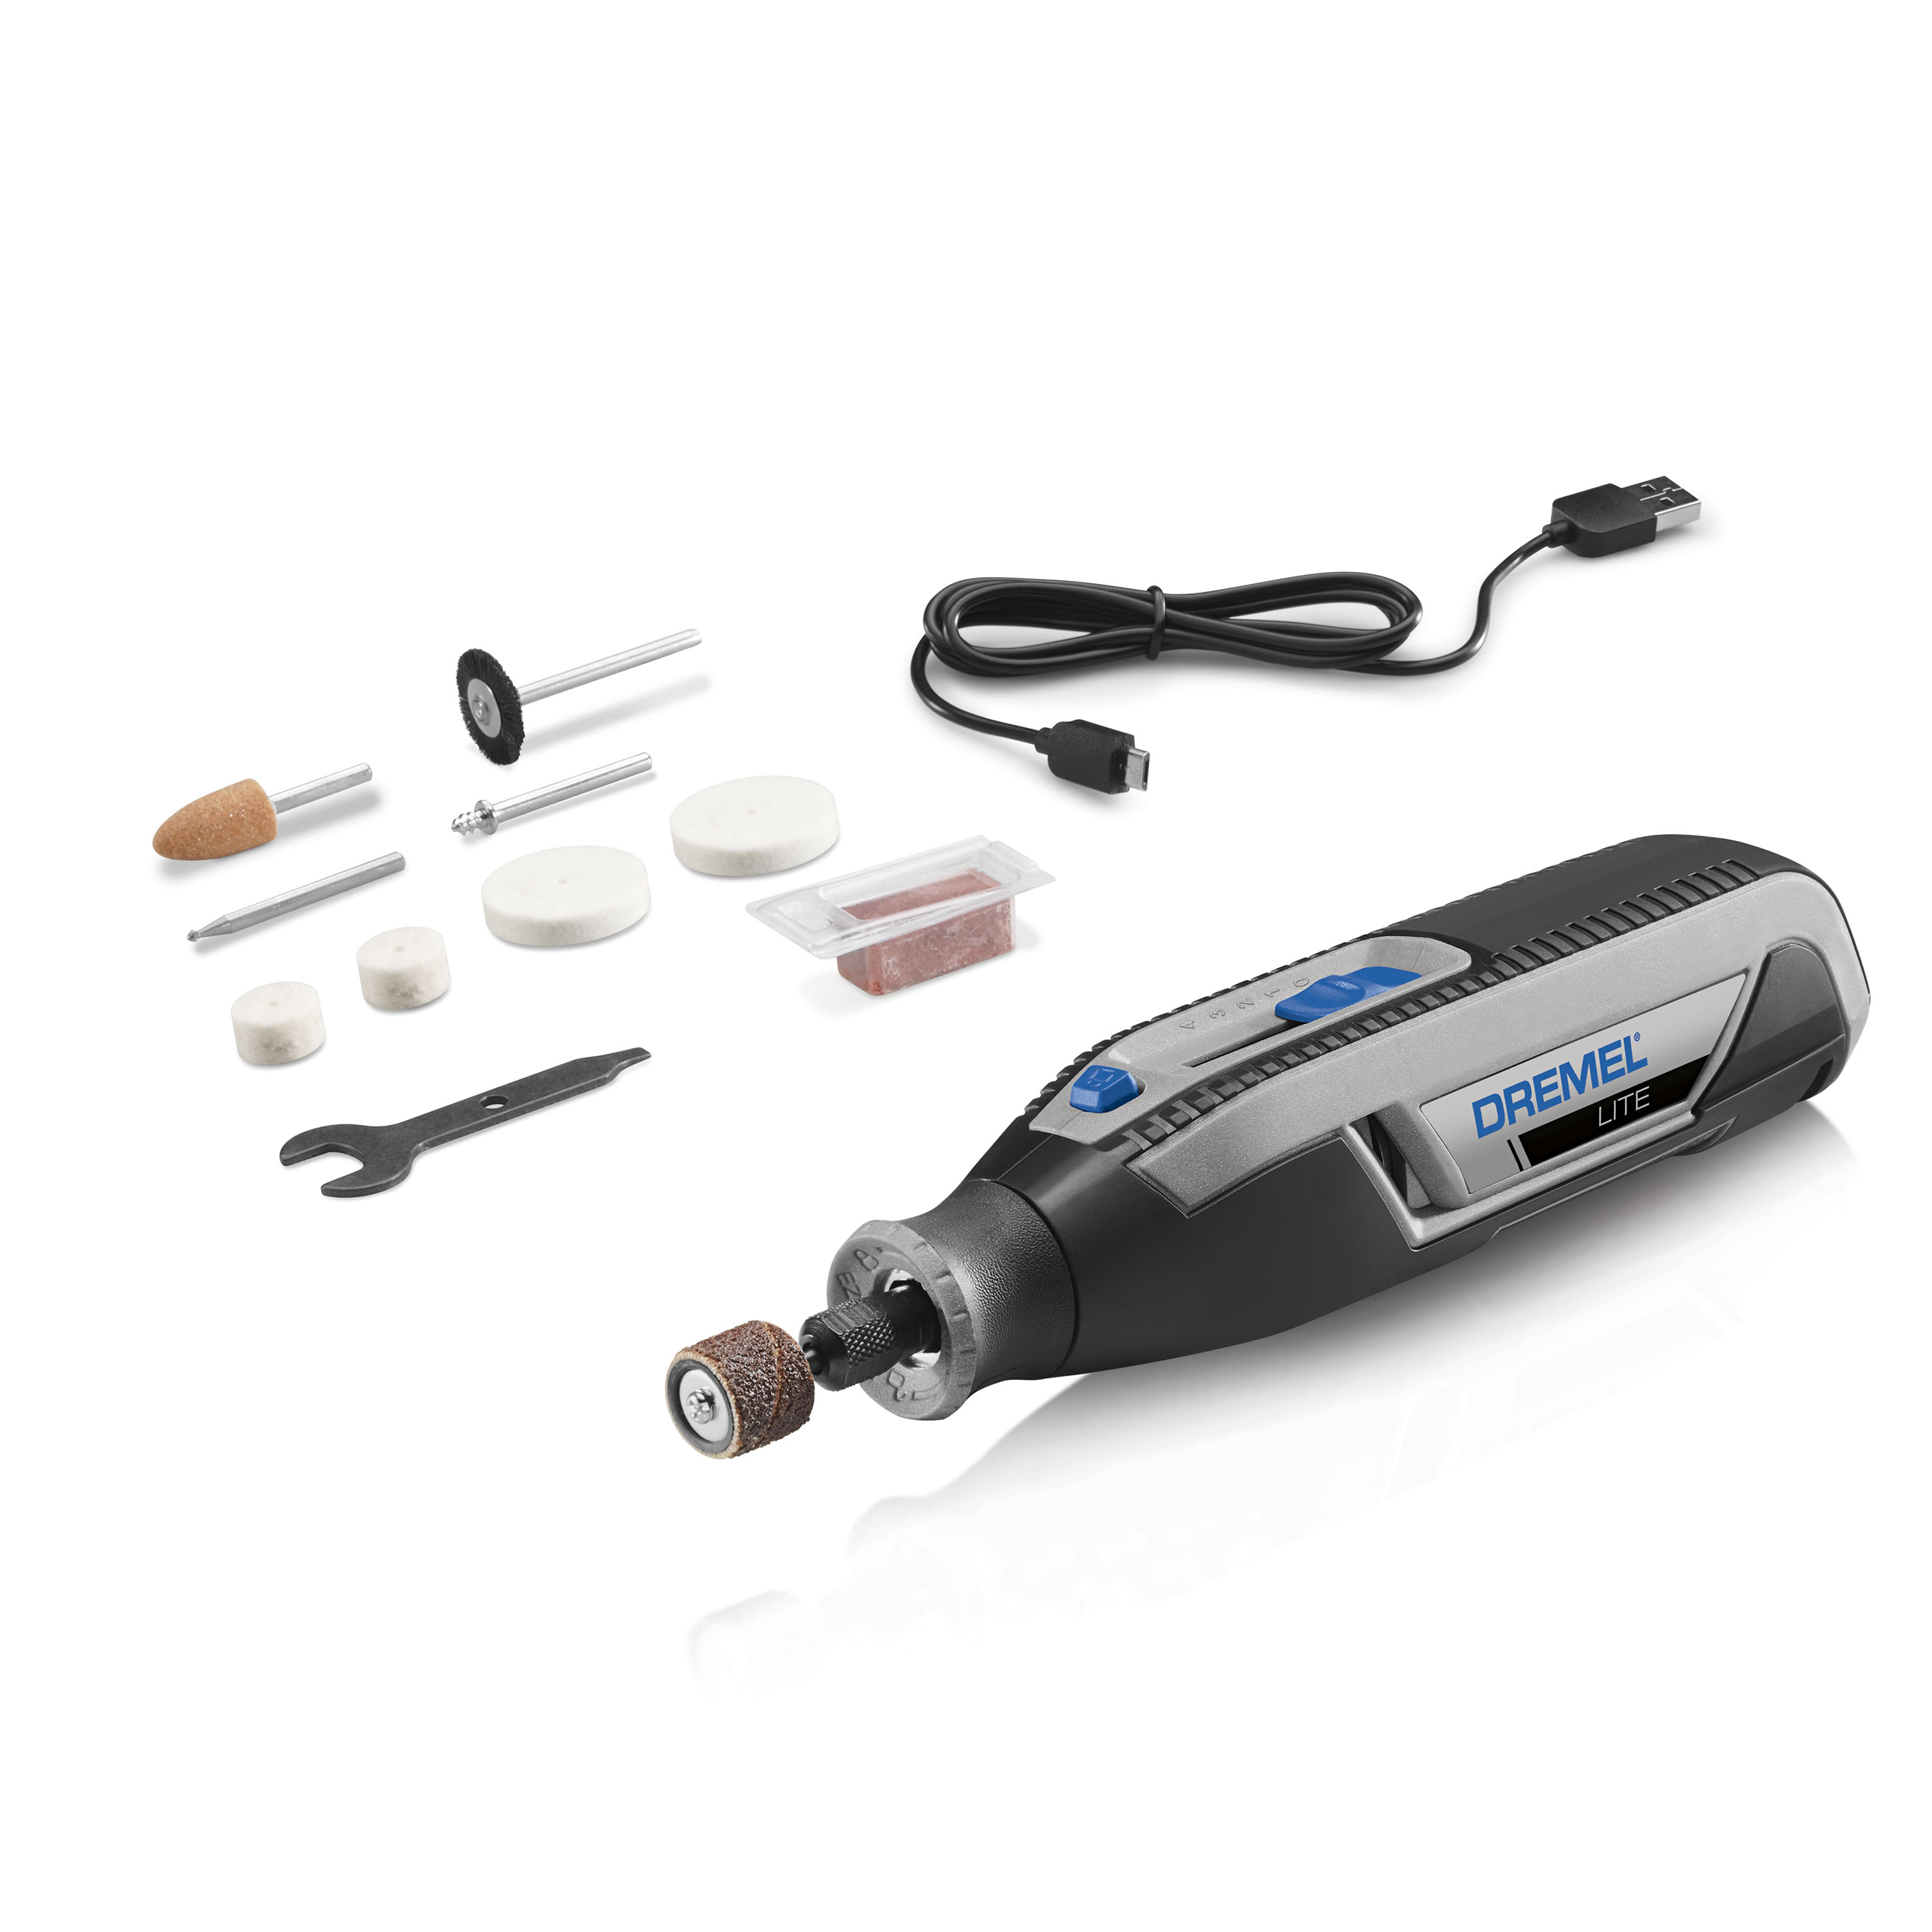 Dremel 7760-N/10W 4V Lite Lithium Ion Cordless Rotary Tool with 10 Accessories USB Charged, Variable Speed Multi-Purpose Rotary Tool Kit, Perfect For Light-Duty DIY & Crafting - image 1 of 17